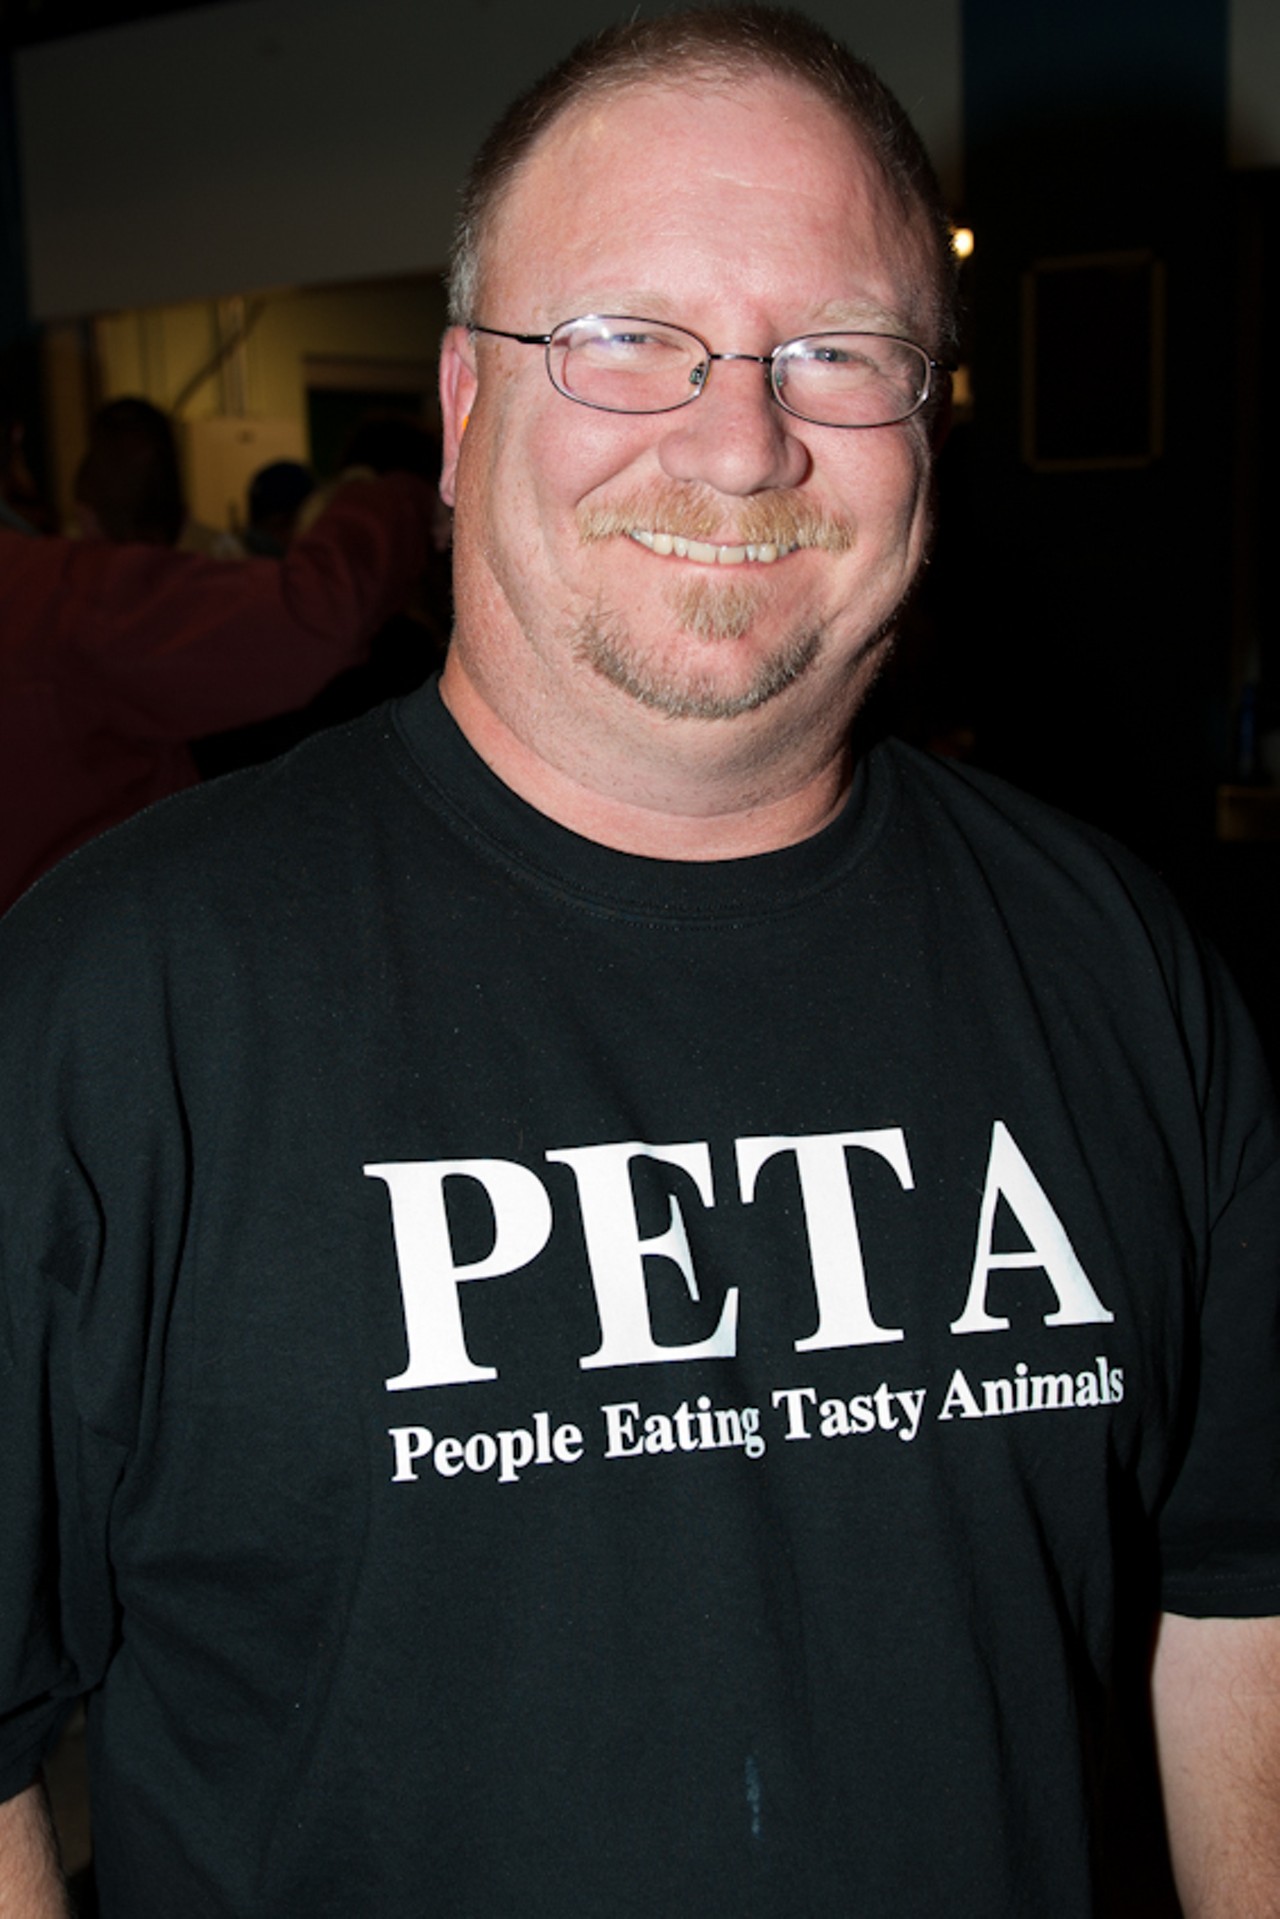 PETA supporters were there too. Oh, wait...